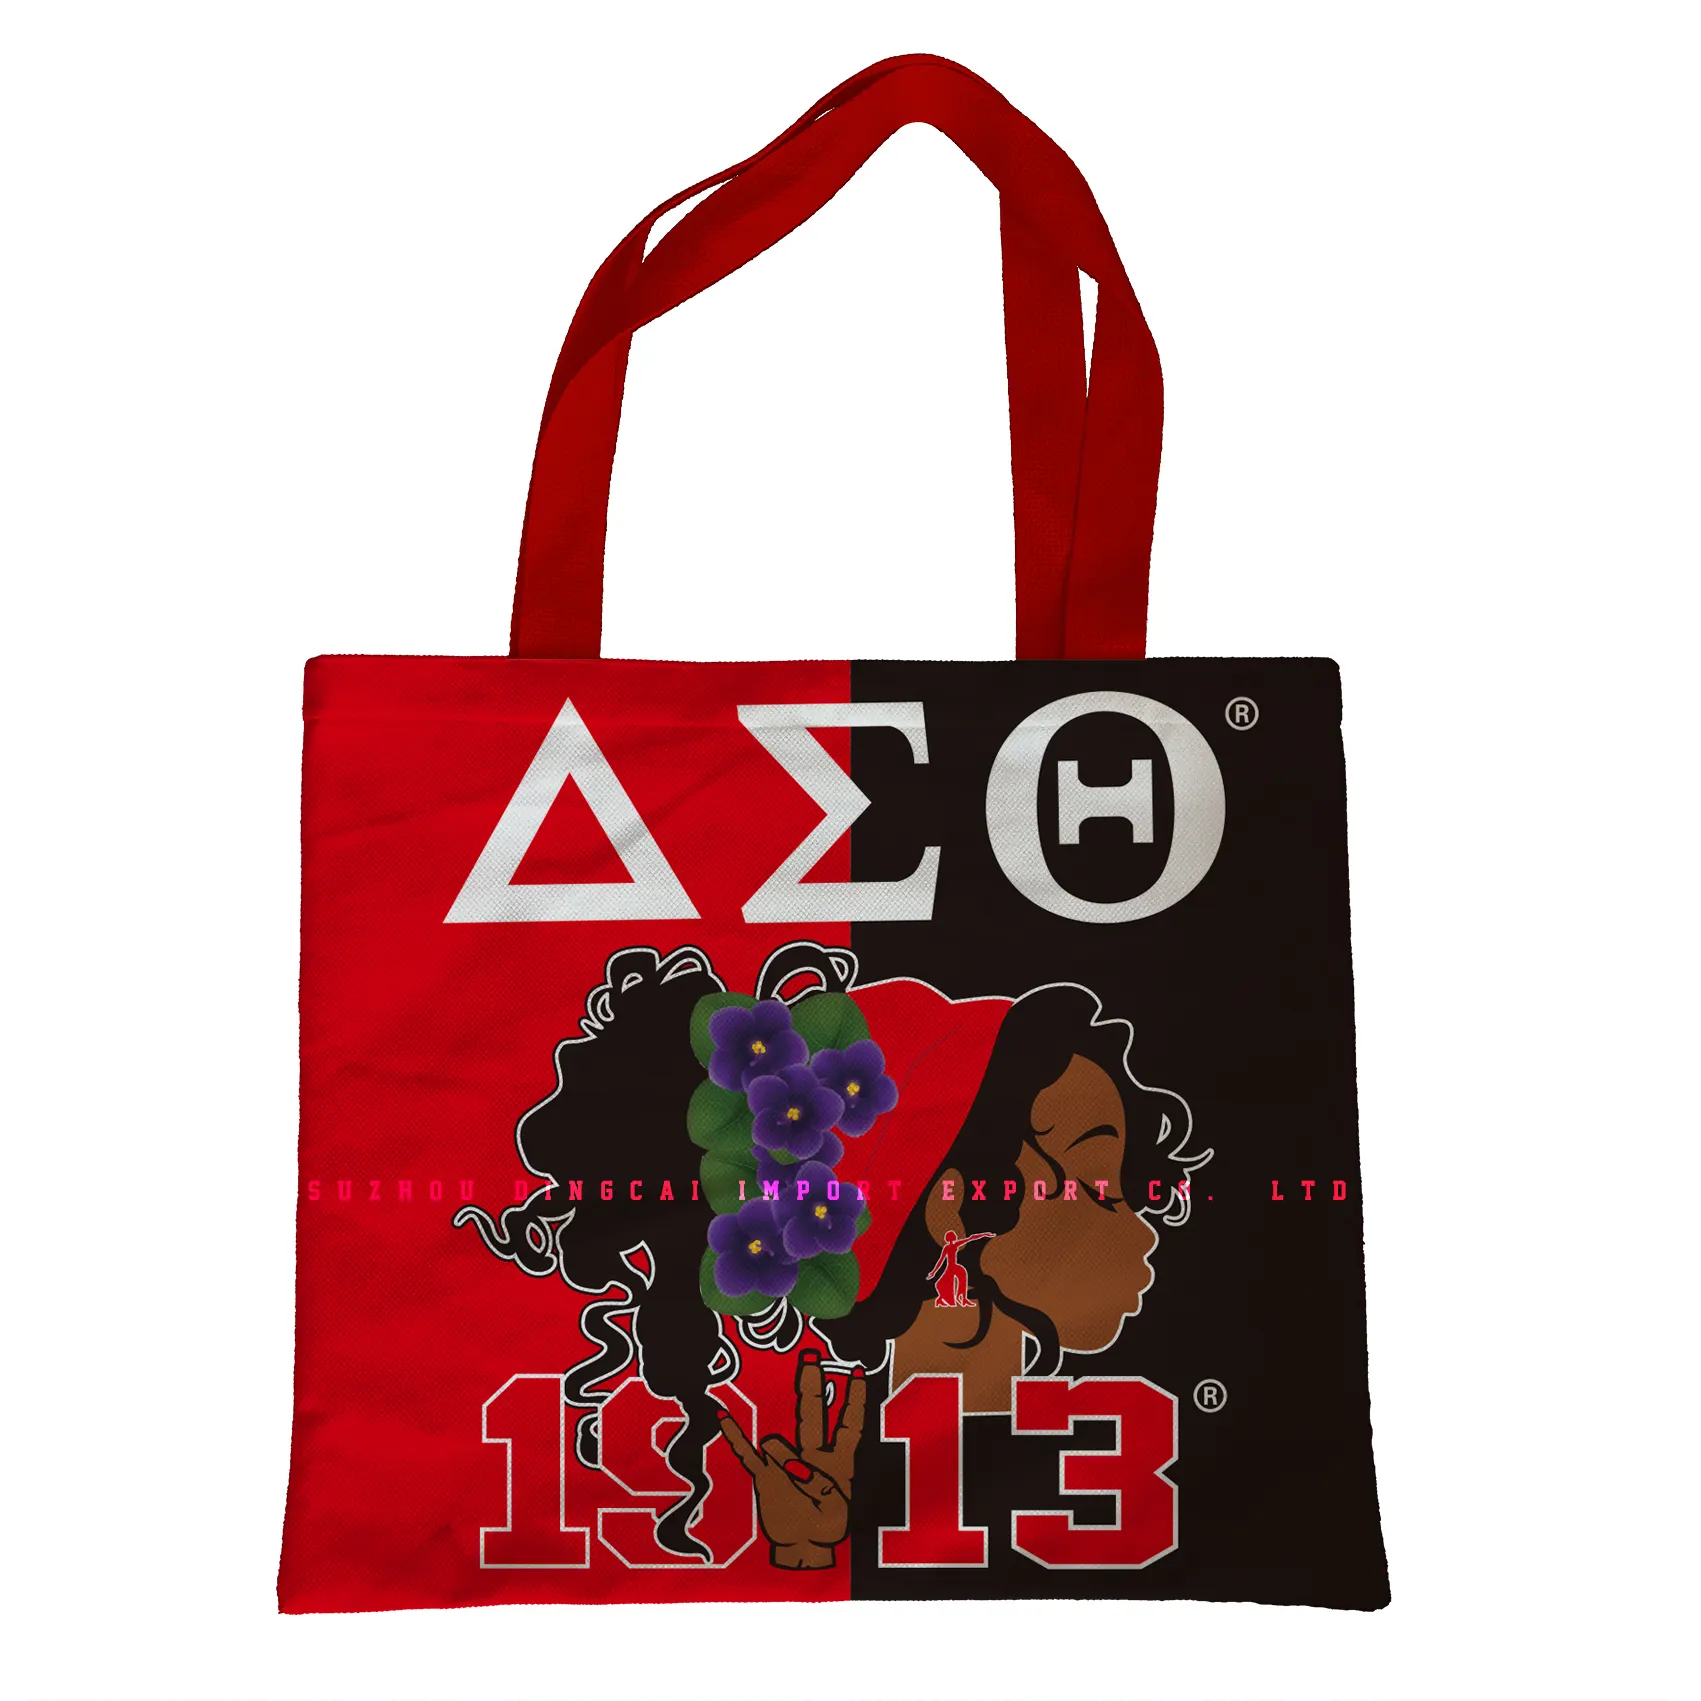 High quality Double Side Sublimation Printing 16"x14" Heavy Material Red and White Greek Letters Tote Bag